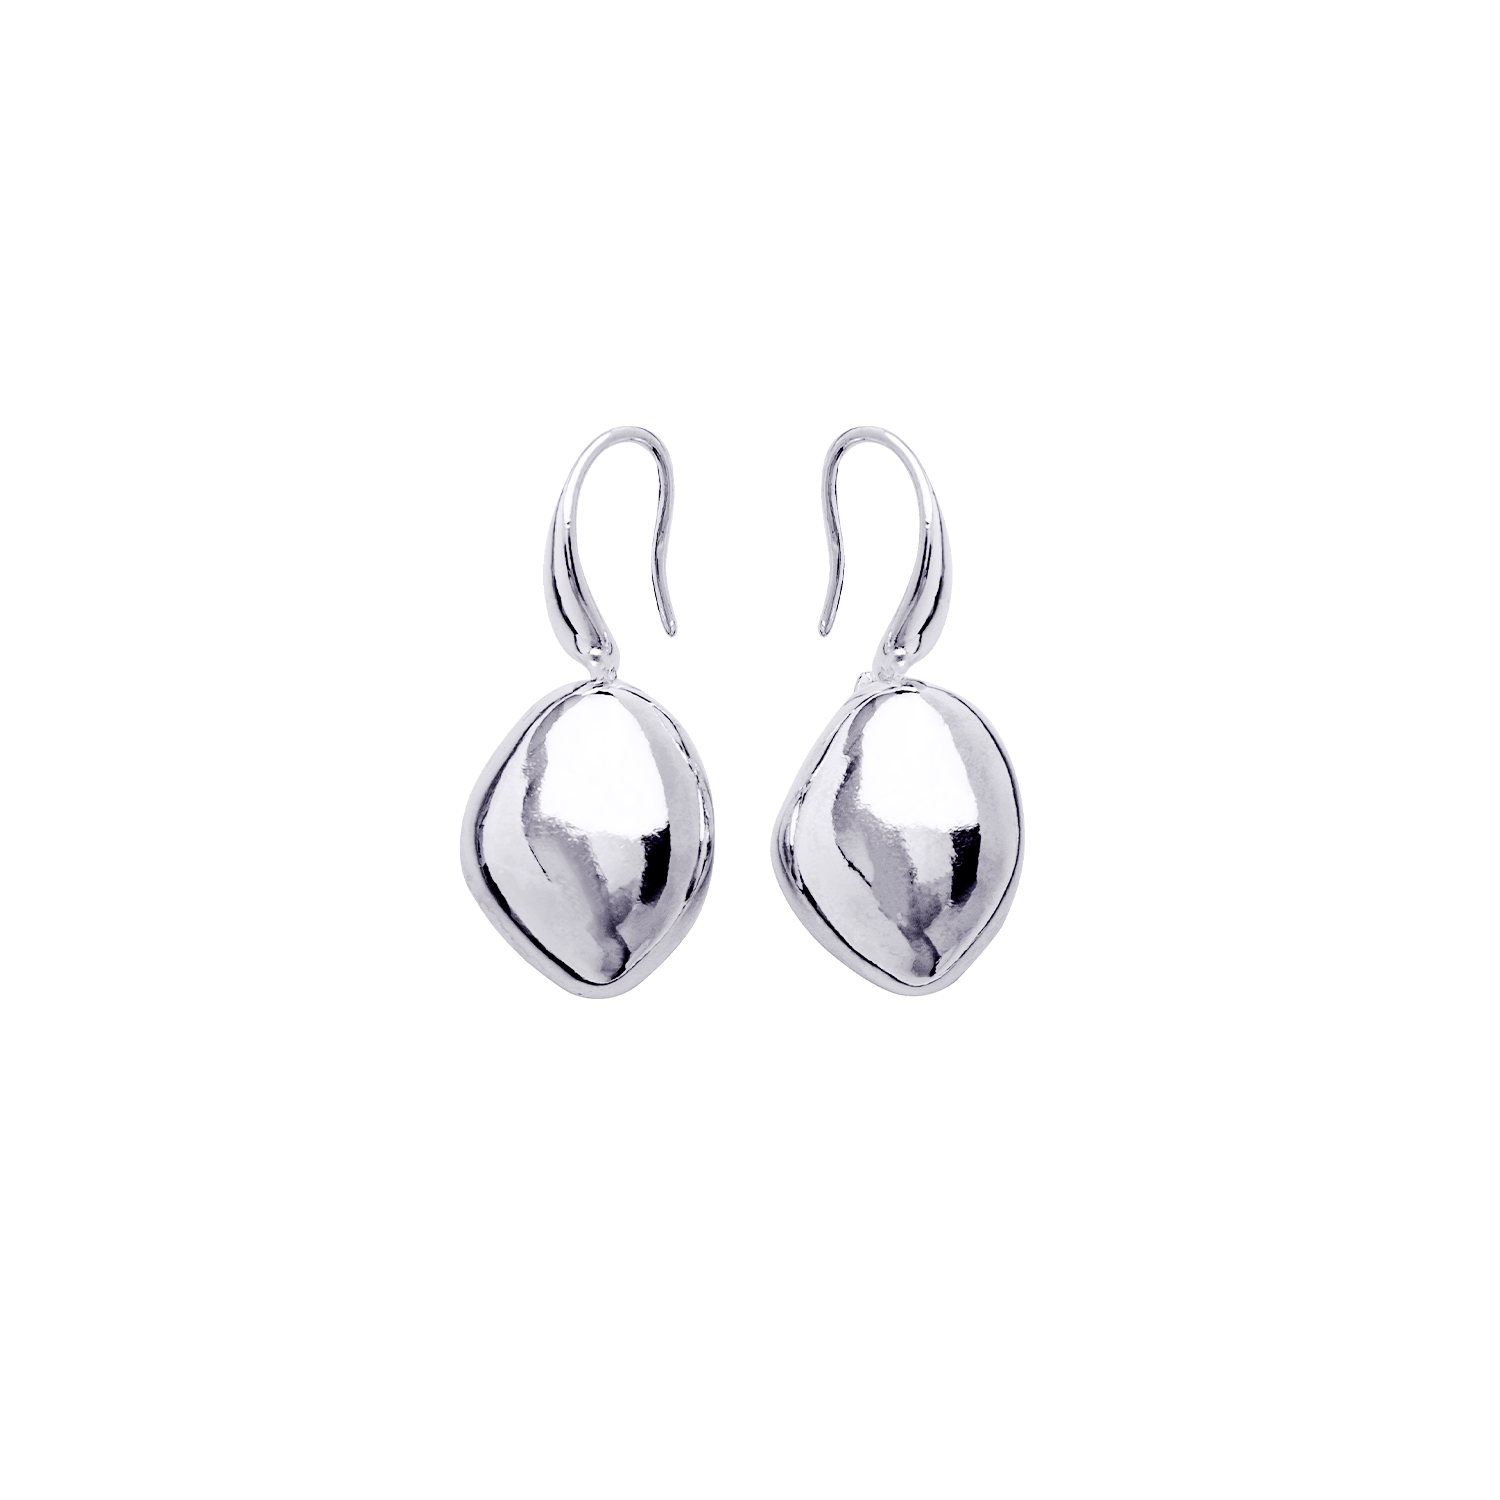 Pebble earrings by Hyrv - inspired by the sea.